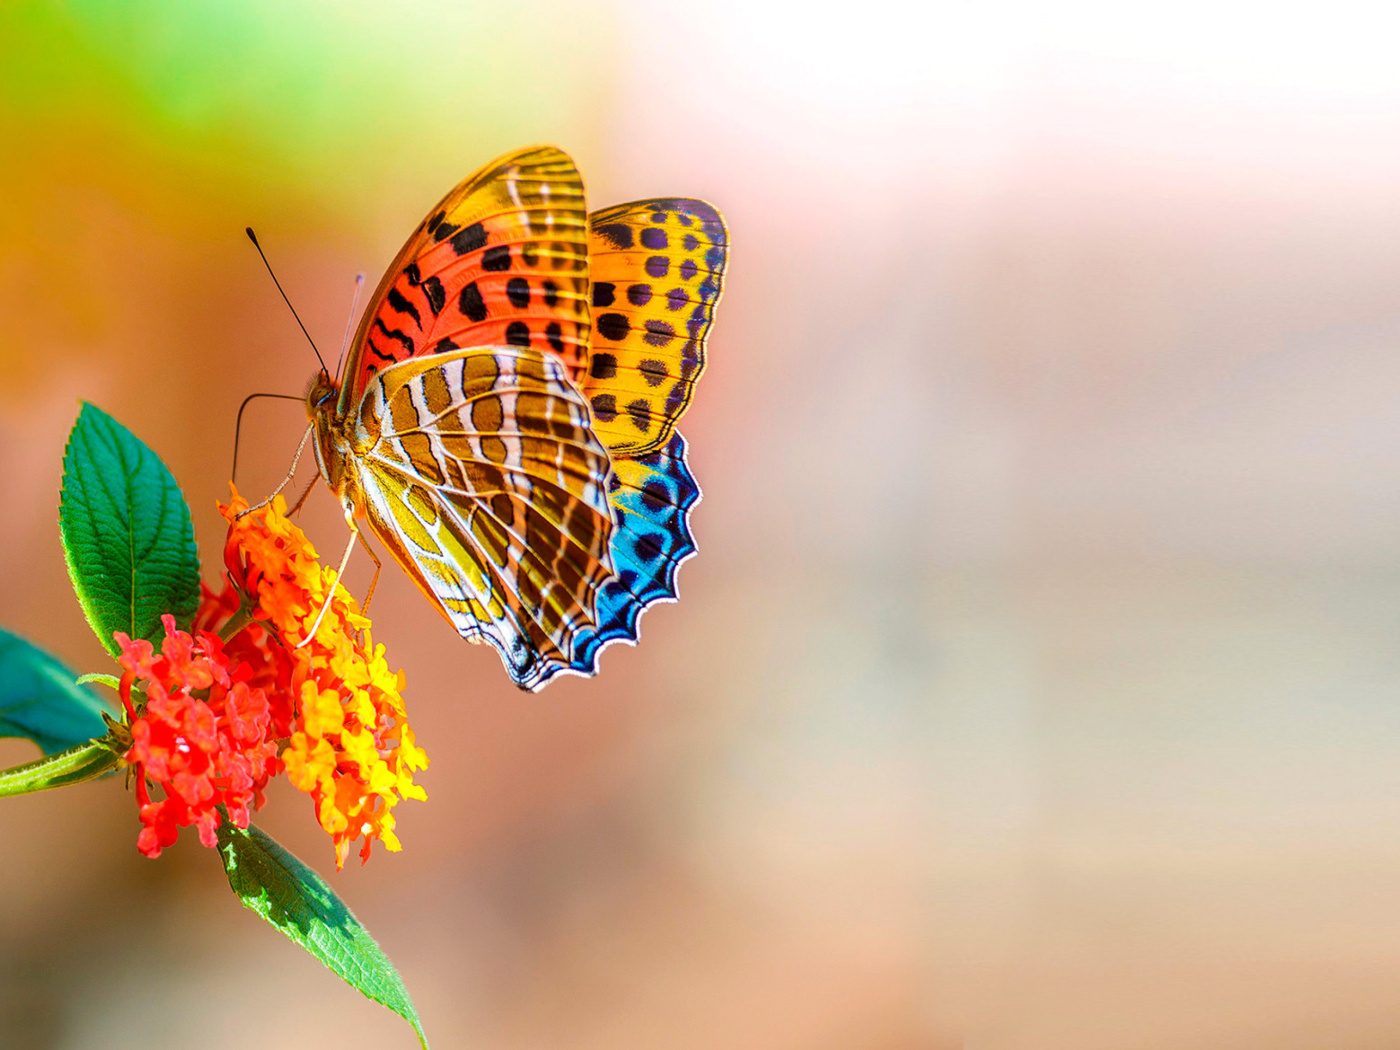 Colorful Animated Butterfly screenshot #1 1400x1050